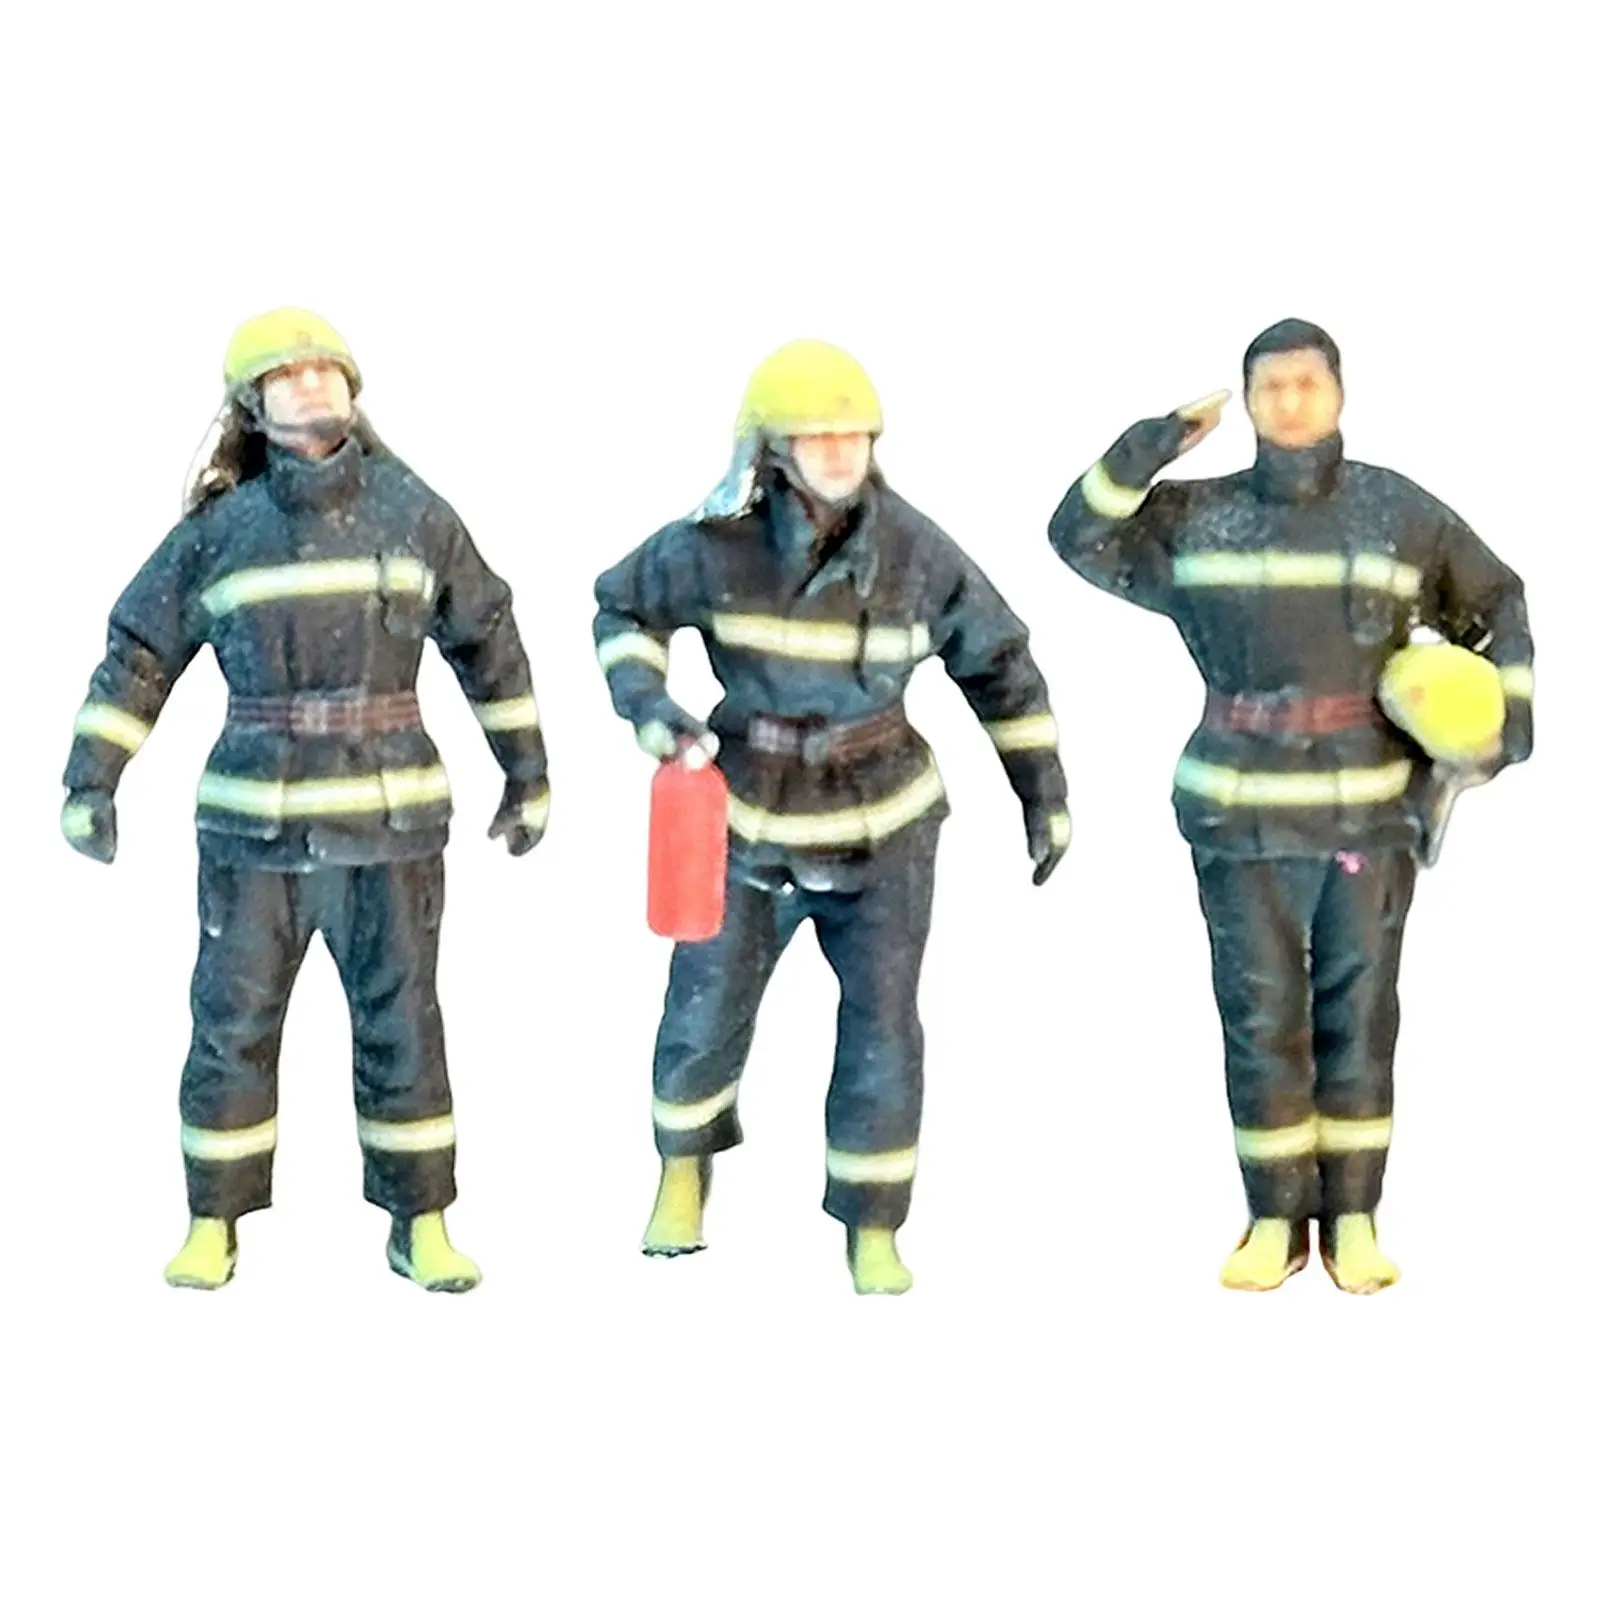 1/64 Scale Firefighter Model Architecture Model Hand Painted Tiny People Model for Diorama DIY Scene Photography Props Decor